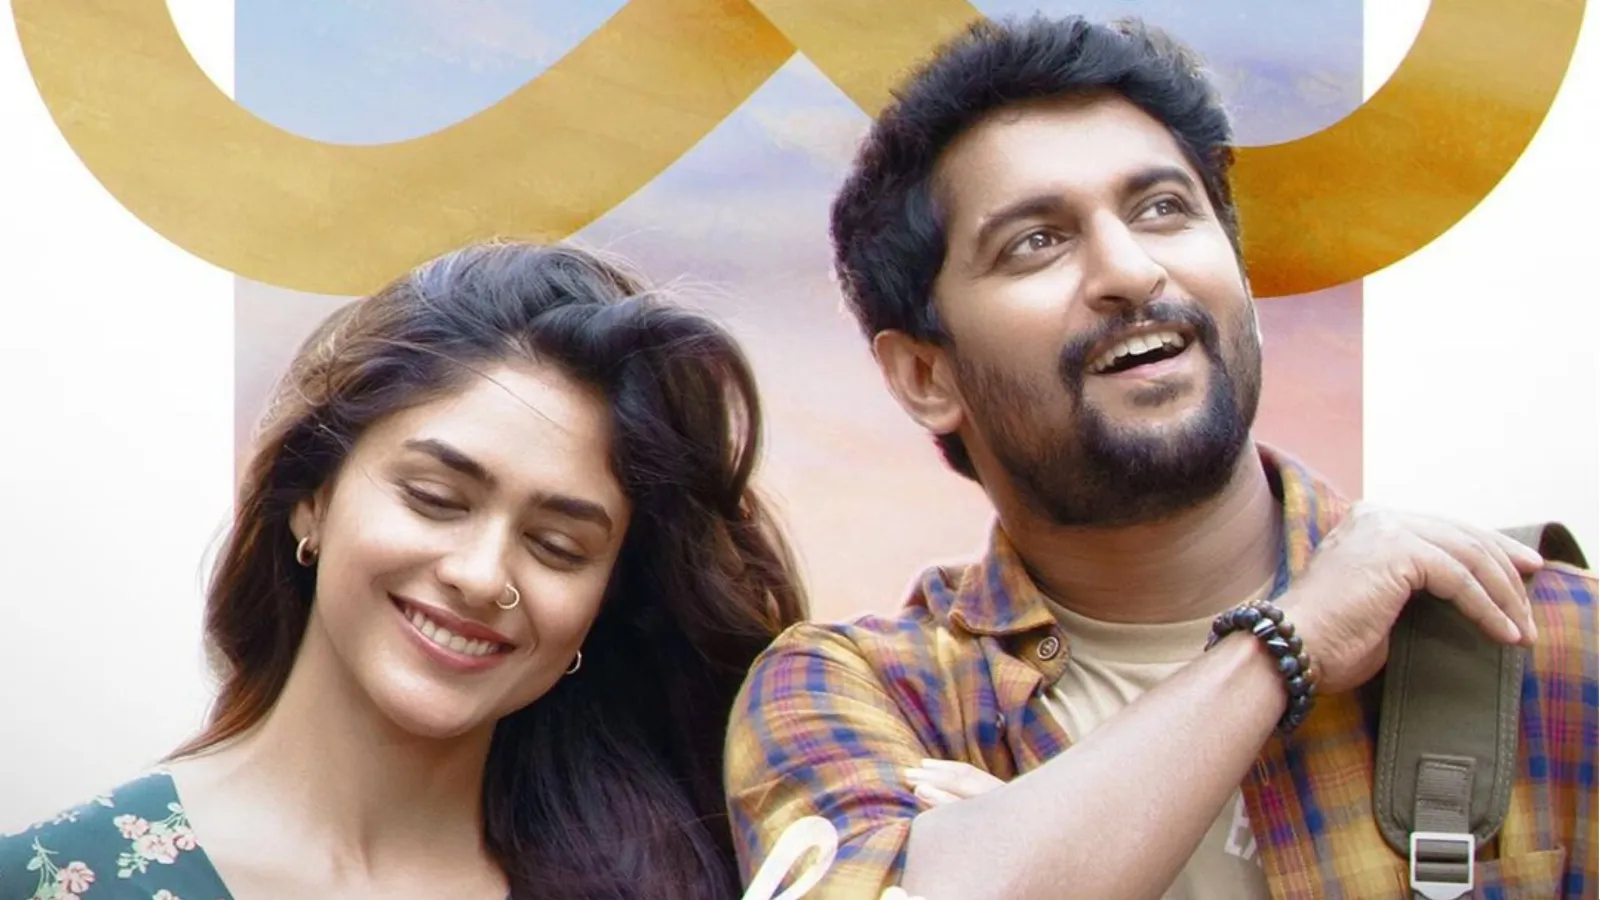 Hi Nanna box office collection day 1: Nani and Mrunal Thakur’s Telugu drama starts on a high note, earns Rs 6.10 crore - The Indian Express